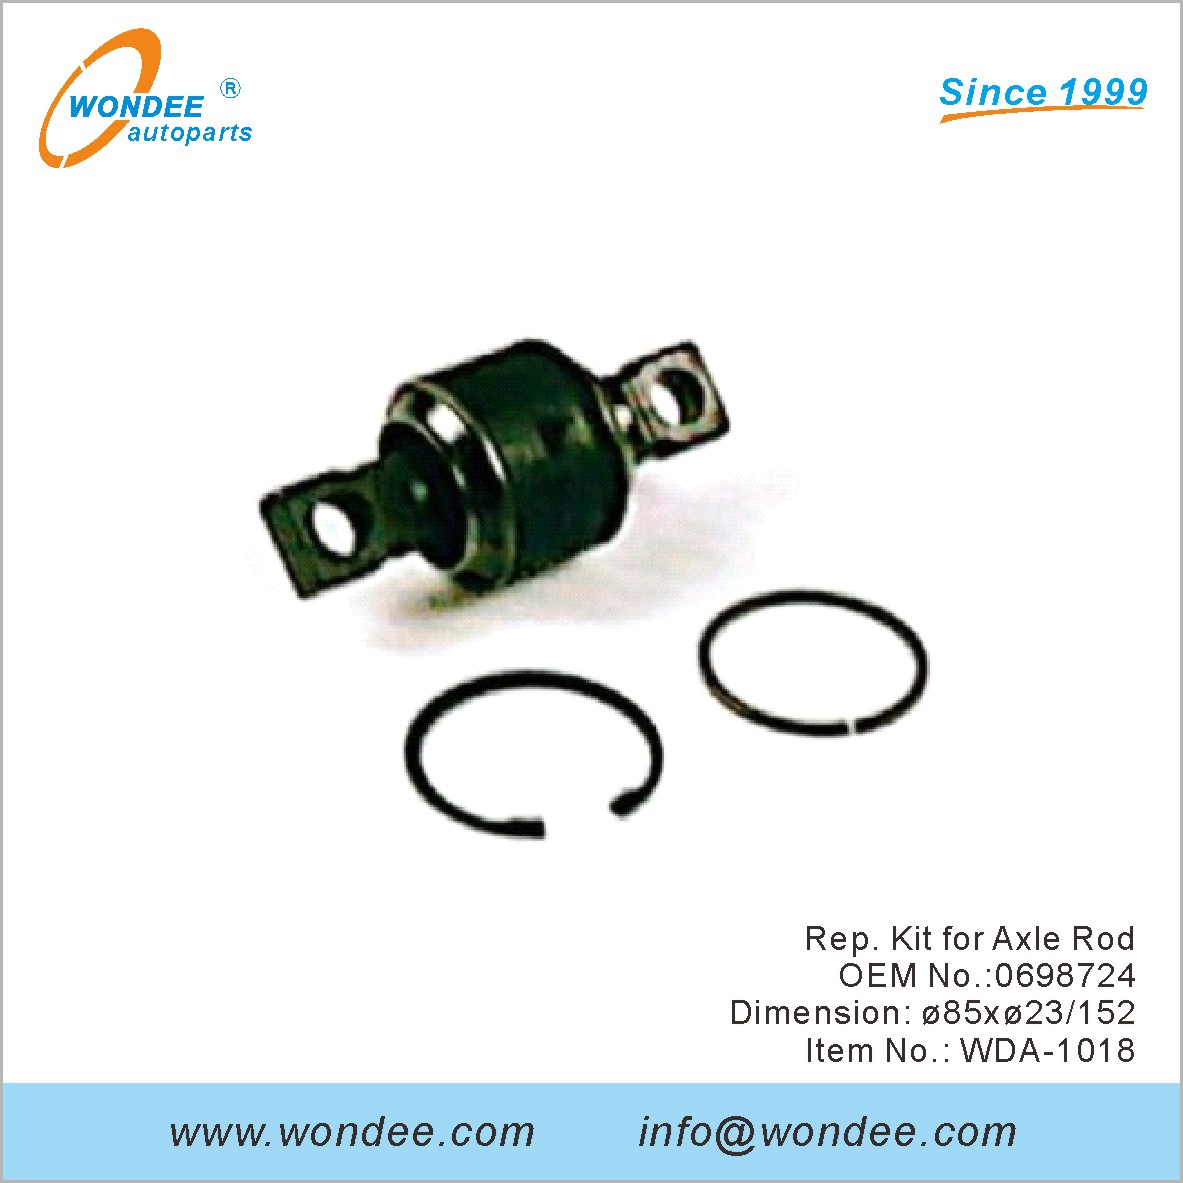 Rep. Kit for Axle Rod OEM 0698724 for DAF from WONDEE